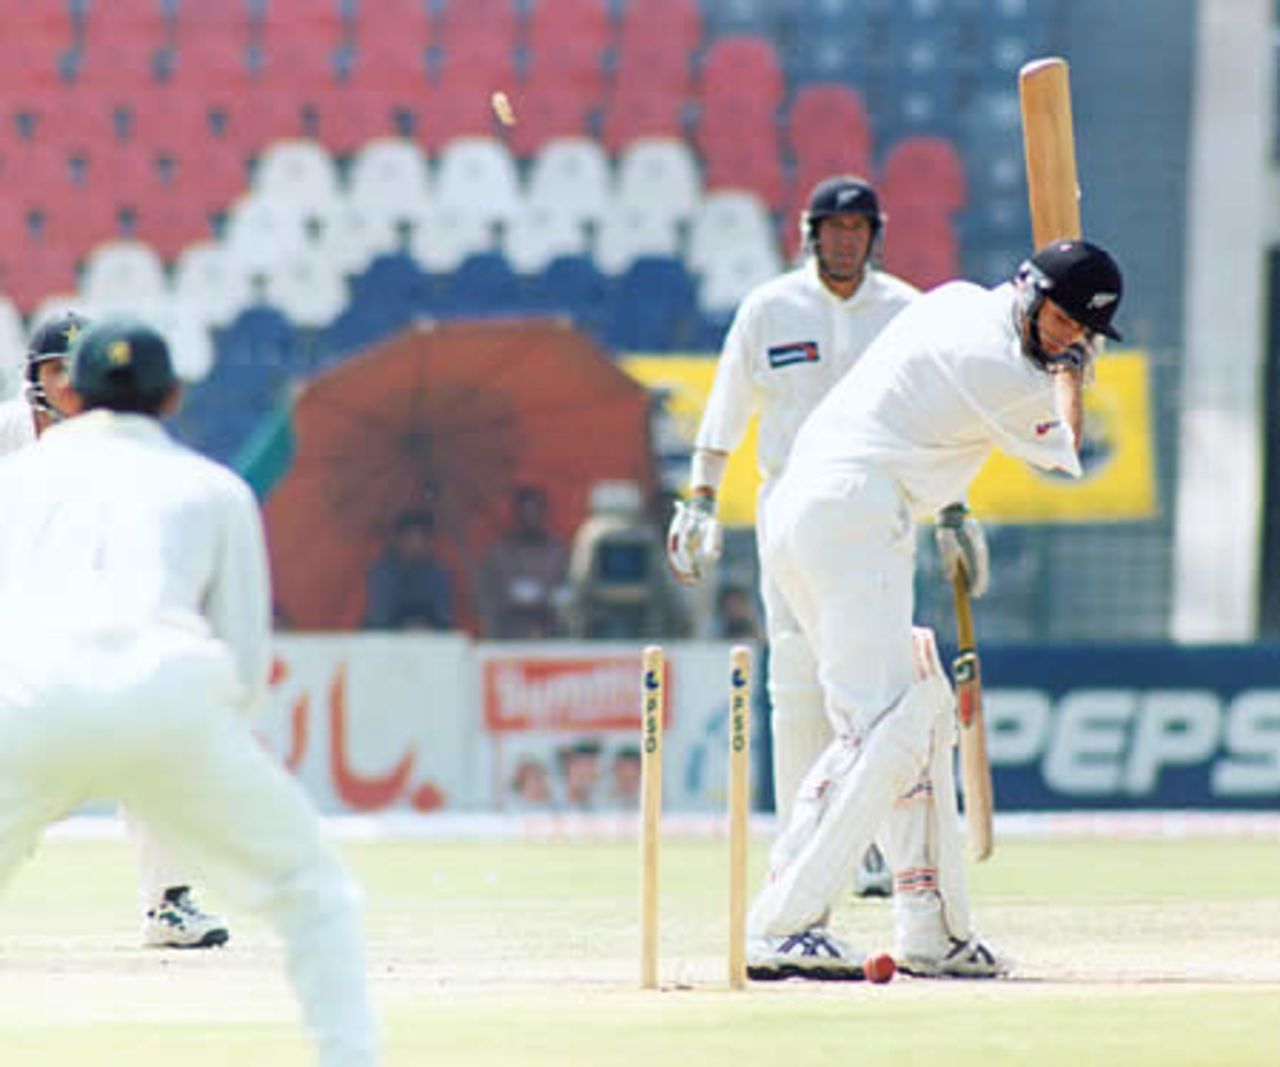 Robbie Hart loses his middle stump and bails - New Zealand second innings, day 3, 1st Test, New Zealand v Pakistan, Gaddafi Stadium Lahore, 3 May 2002